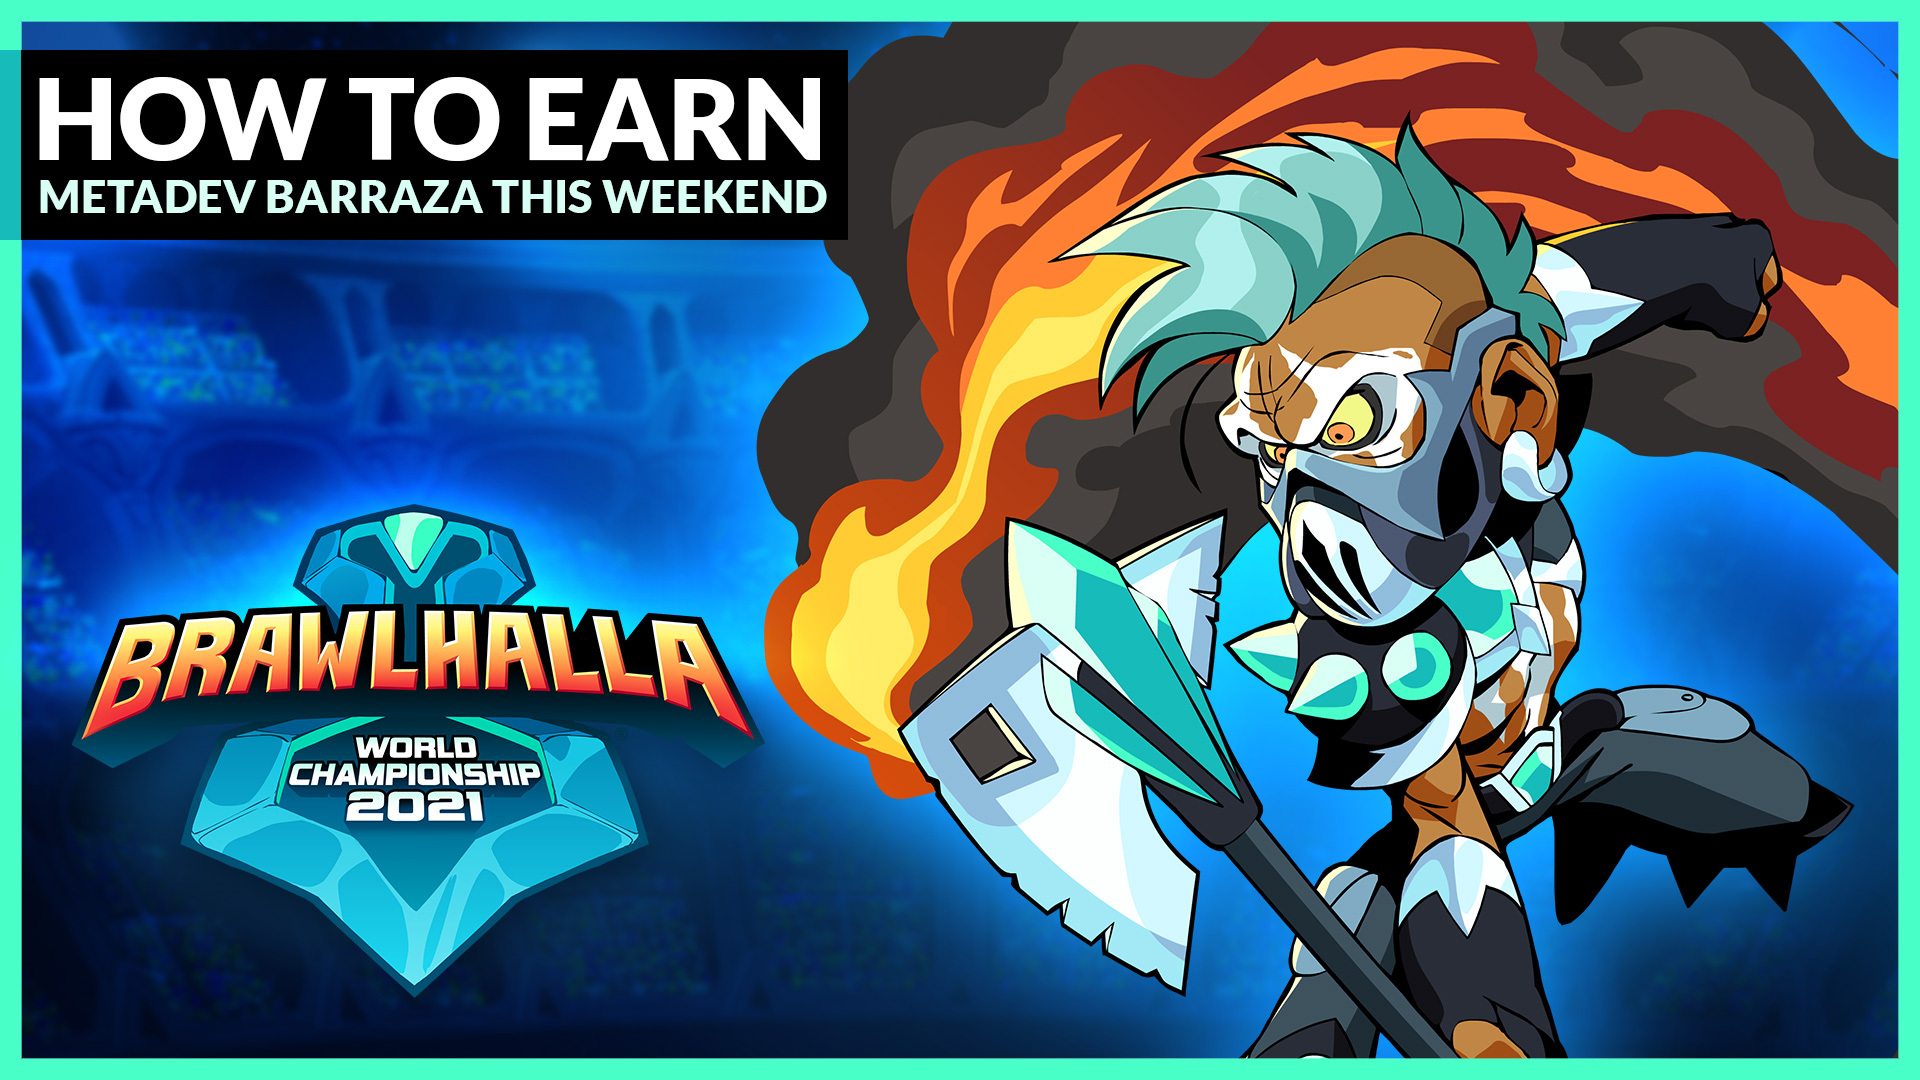 How to Earn Metadev Barraza and Other Items This Weekend